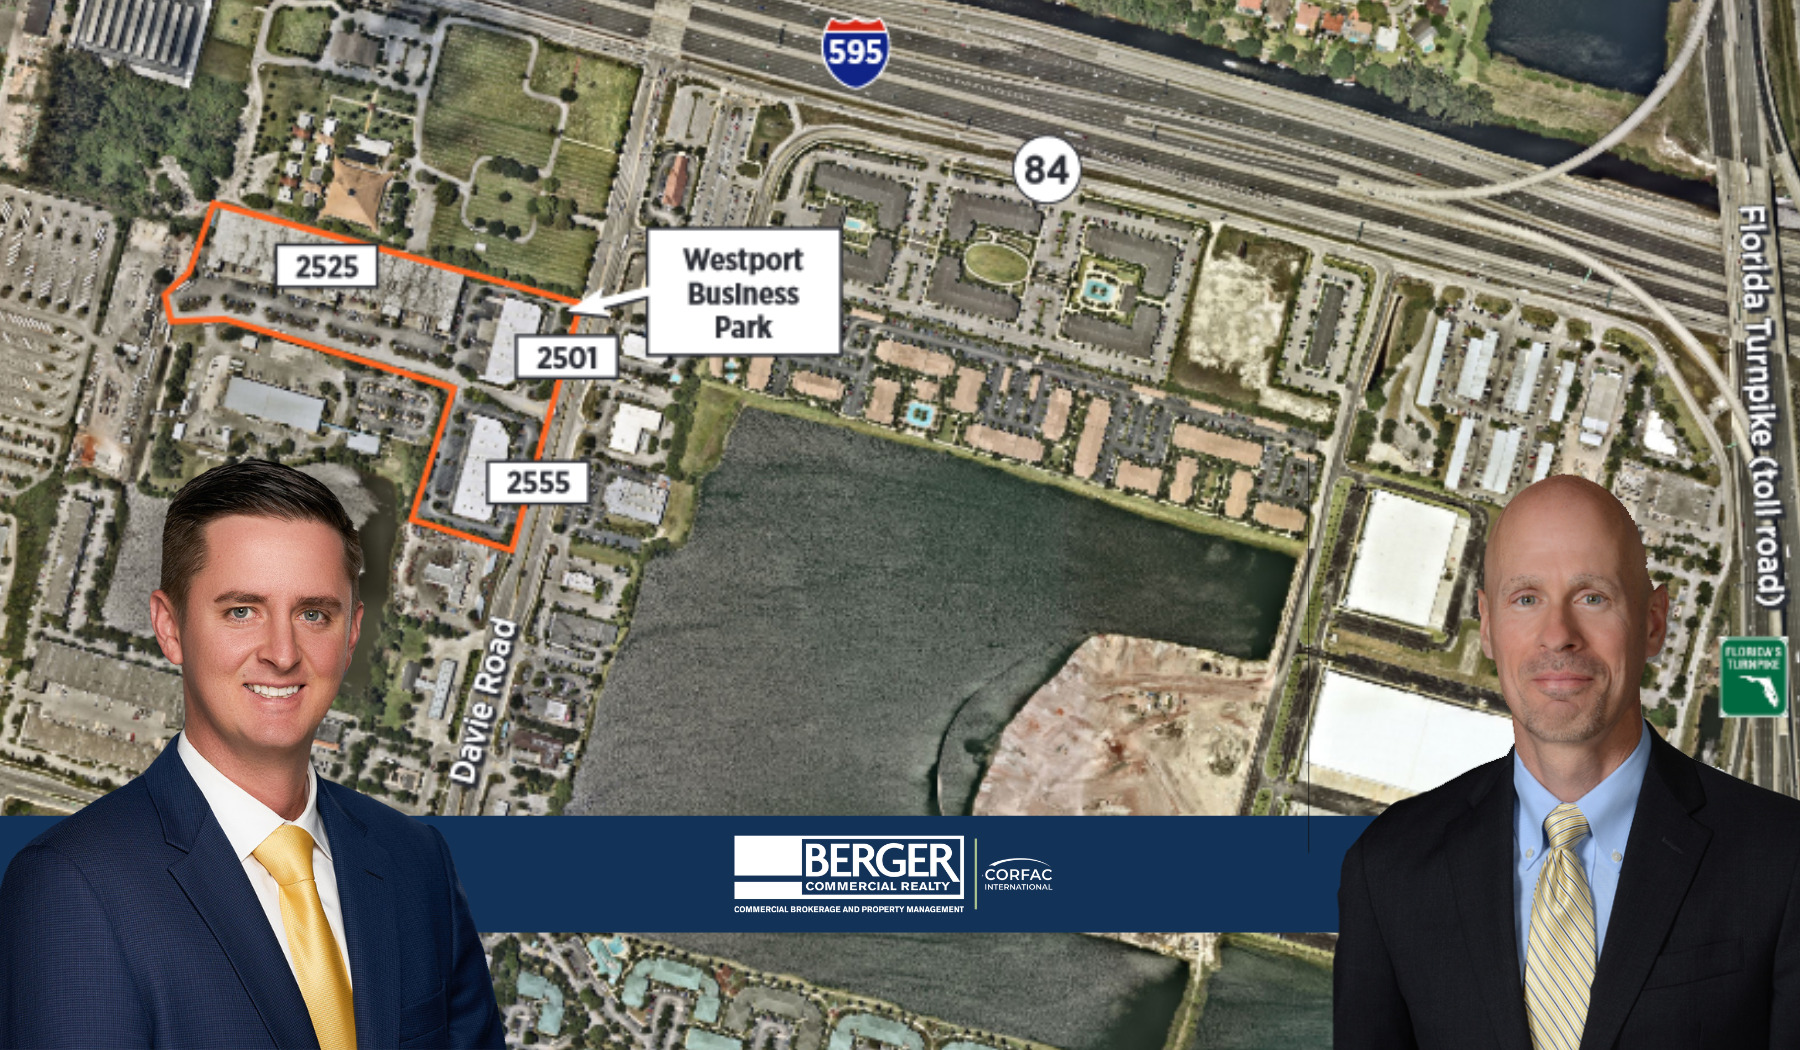 Berger Commercial Realty Awarded New Leasing Assignment Totaling More Than 199,700 Square Feet